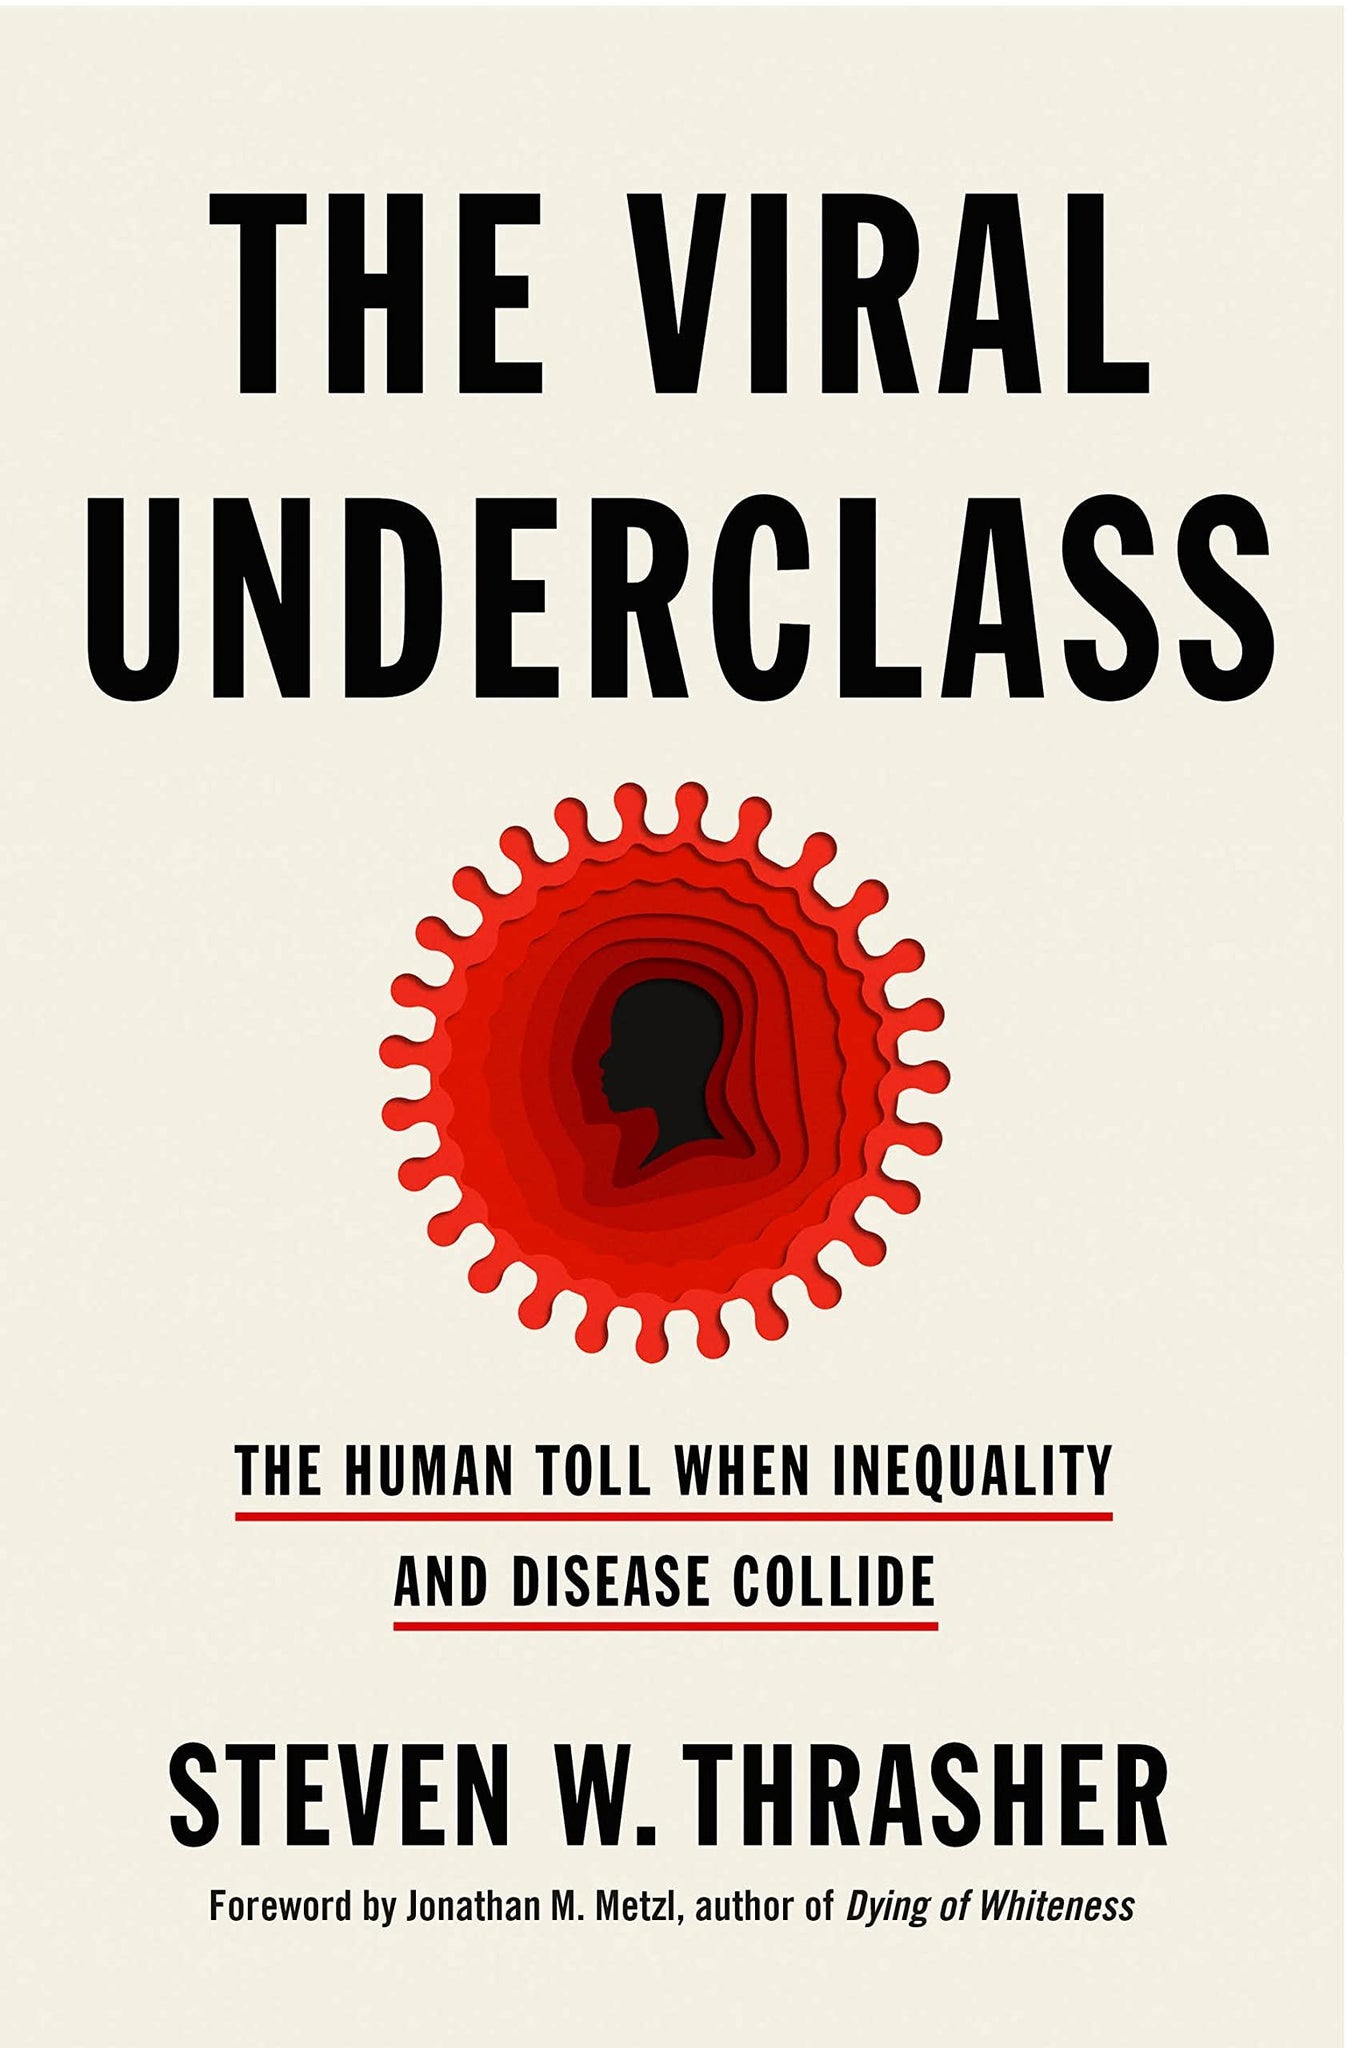 The Viral Underclass: The Human Toll When Inequality and Disease Collide - ShopQueer.co